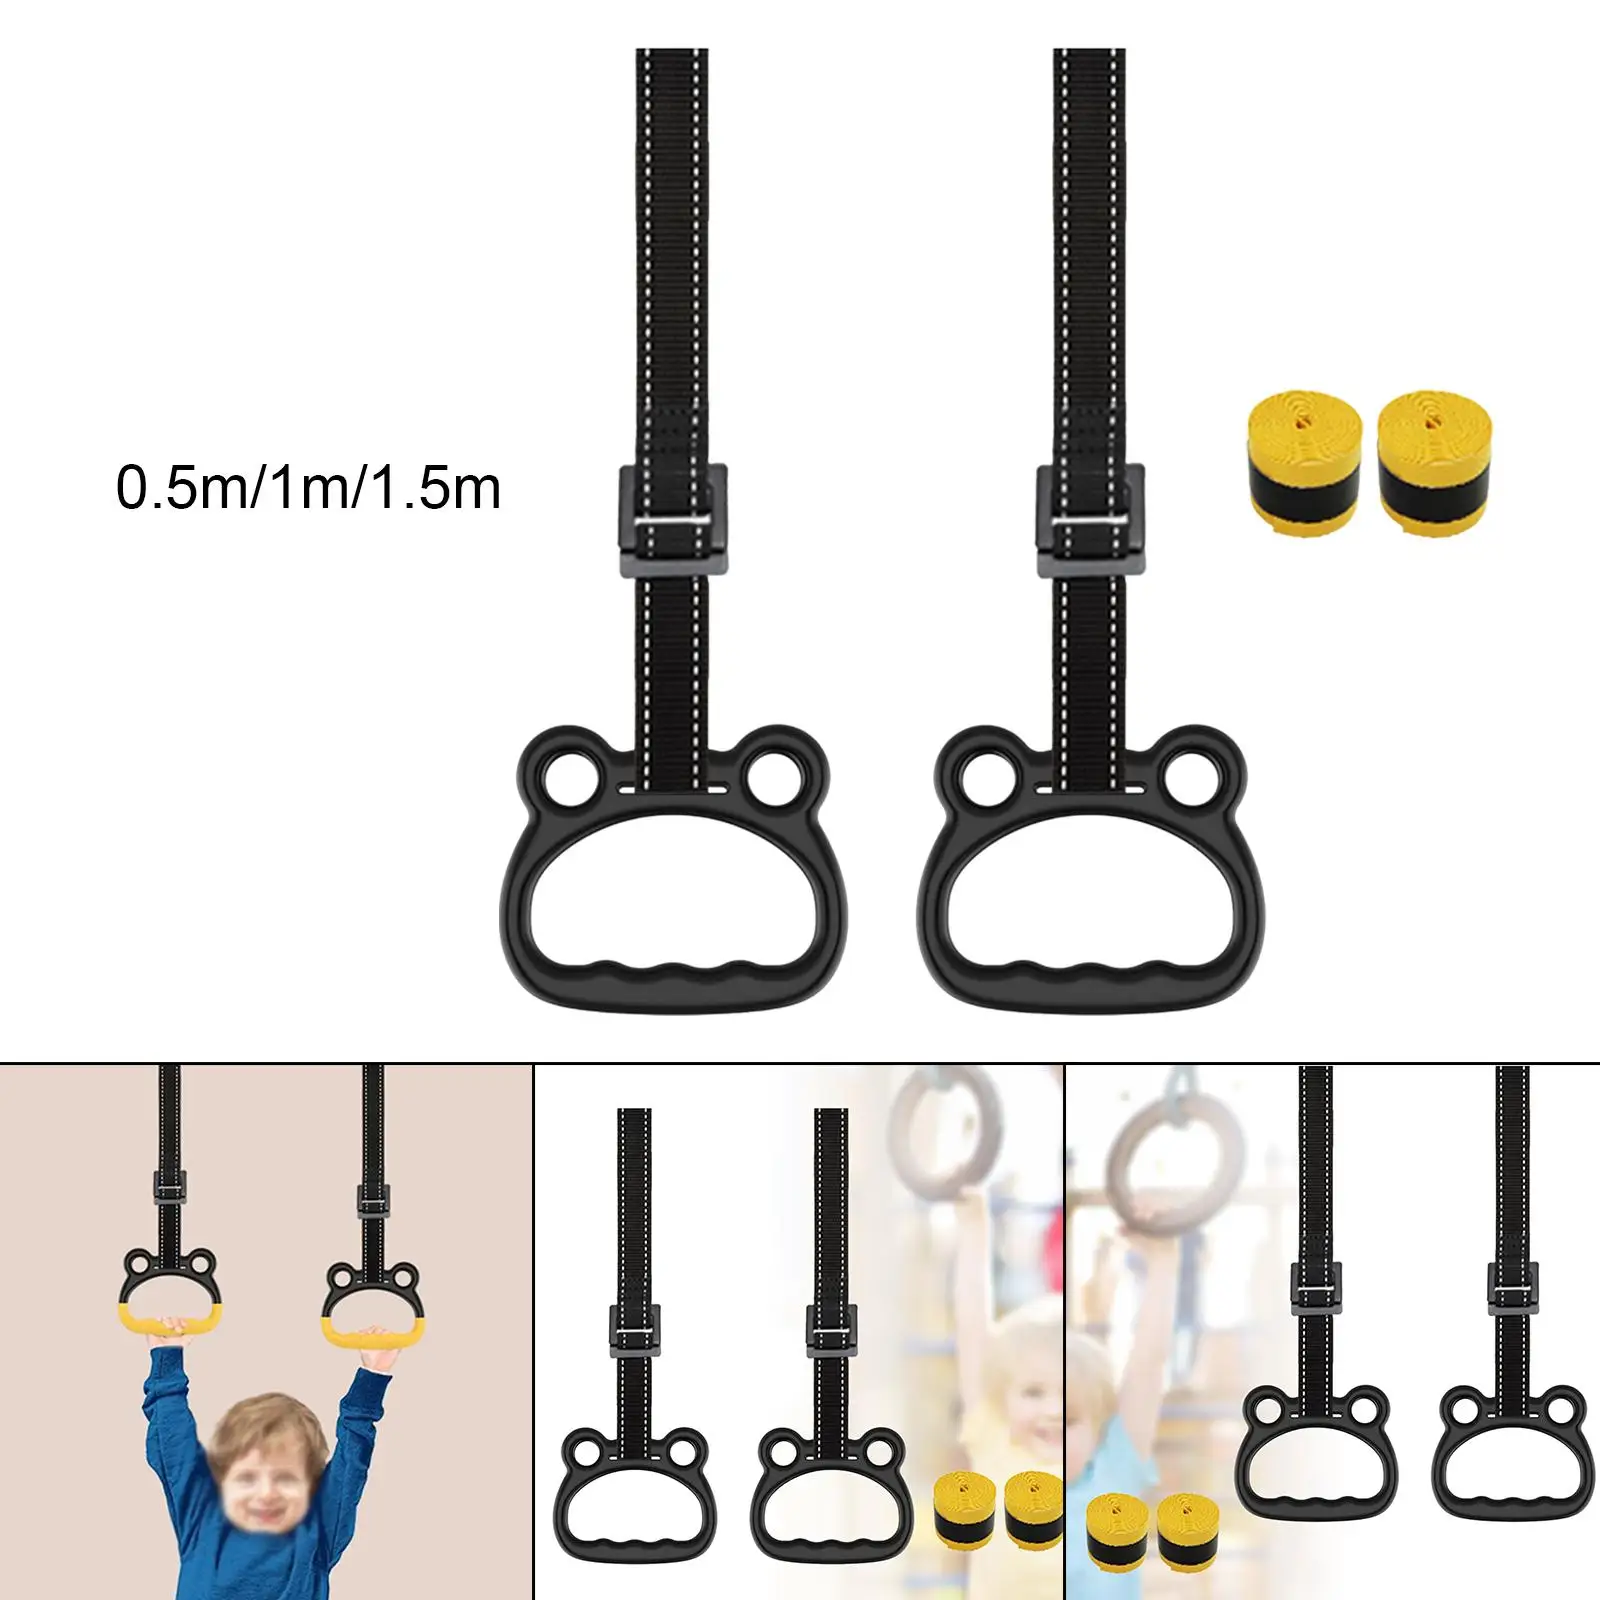 Gymnastics Rings Strength Training Workouts Home Hanging Gym Ring for Kids Adult